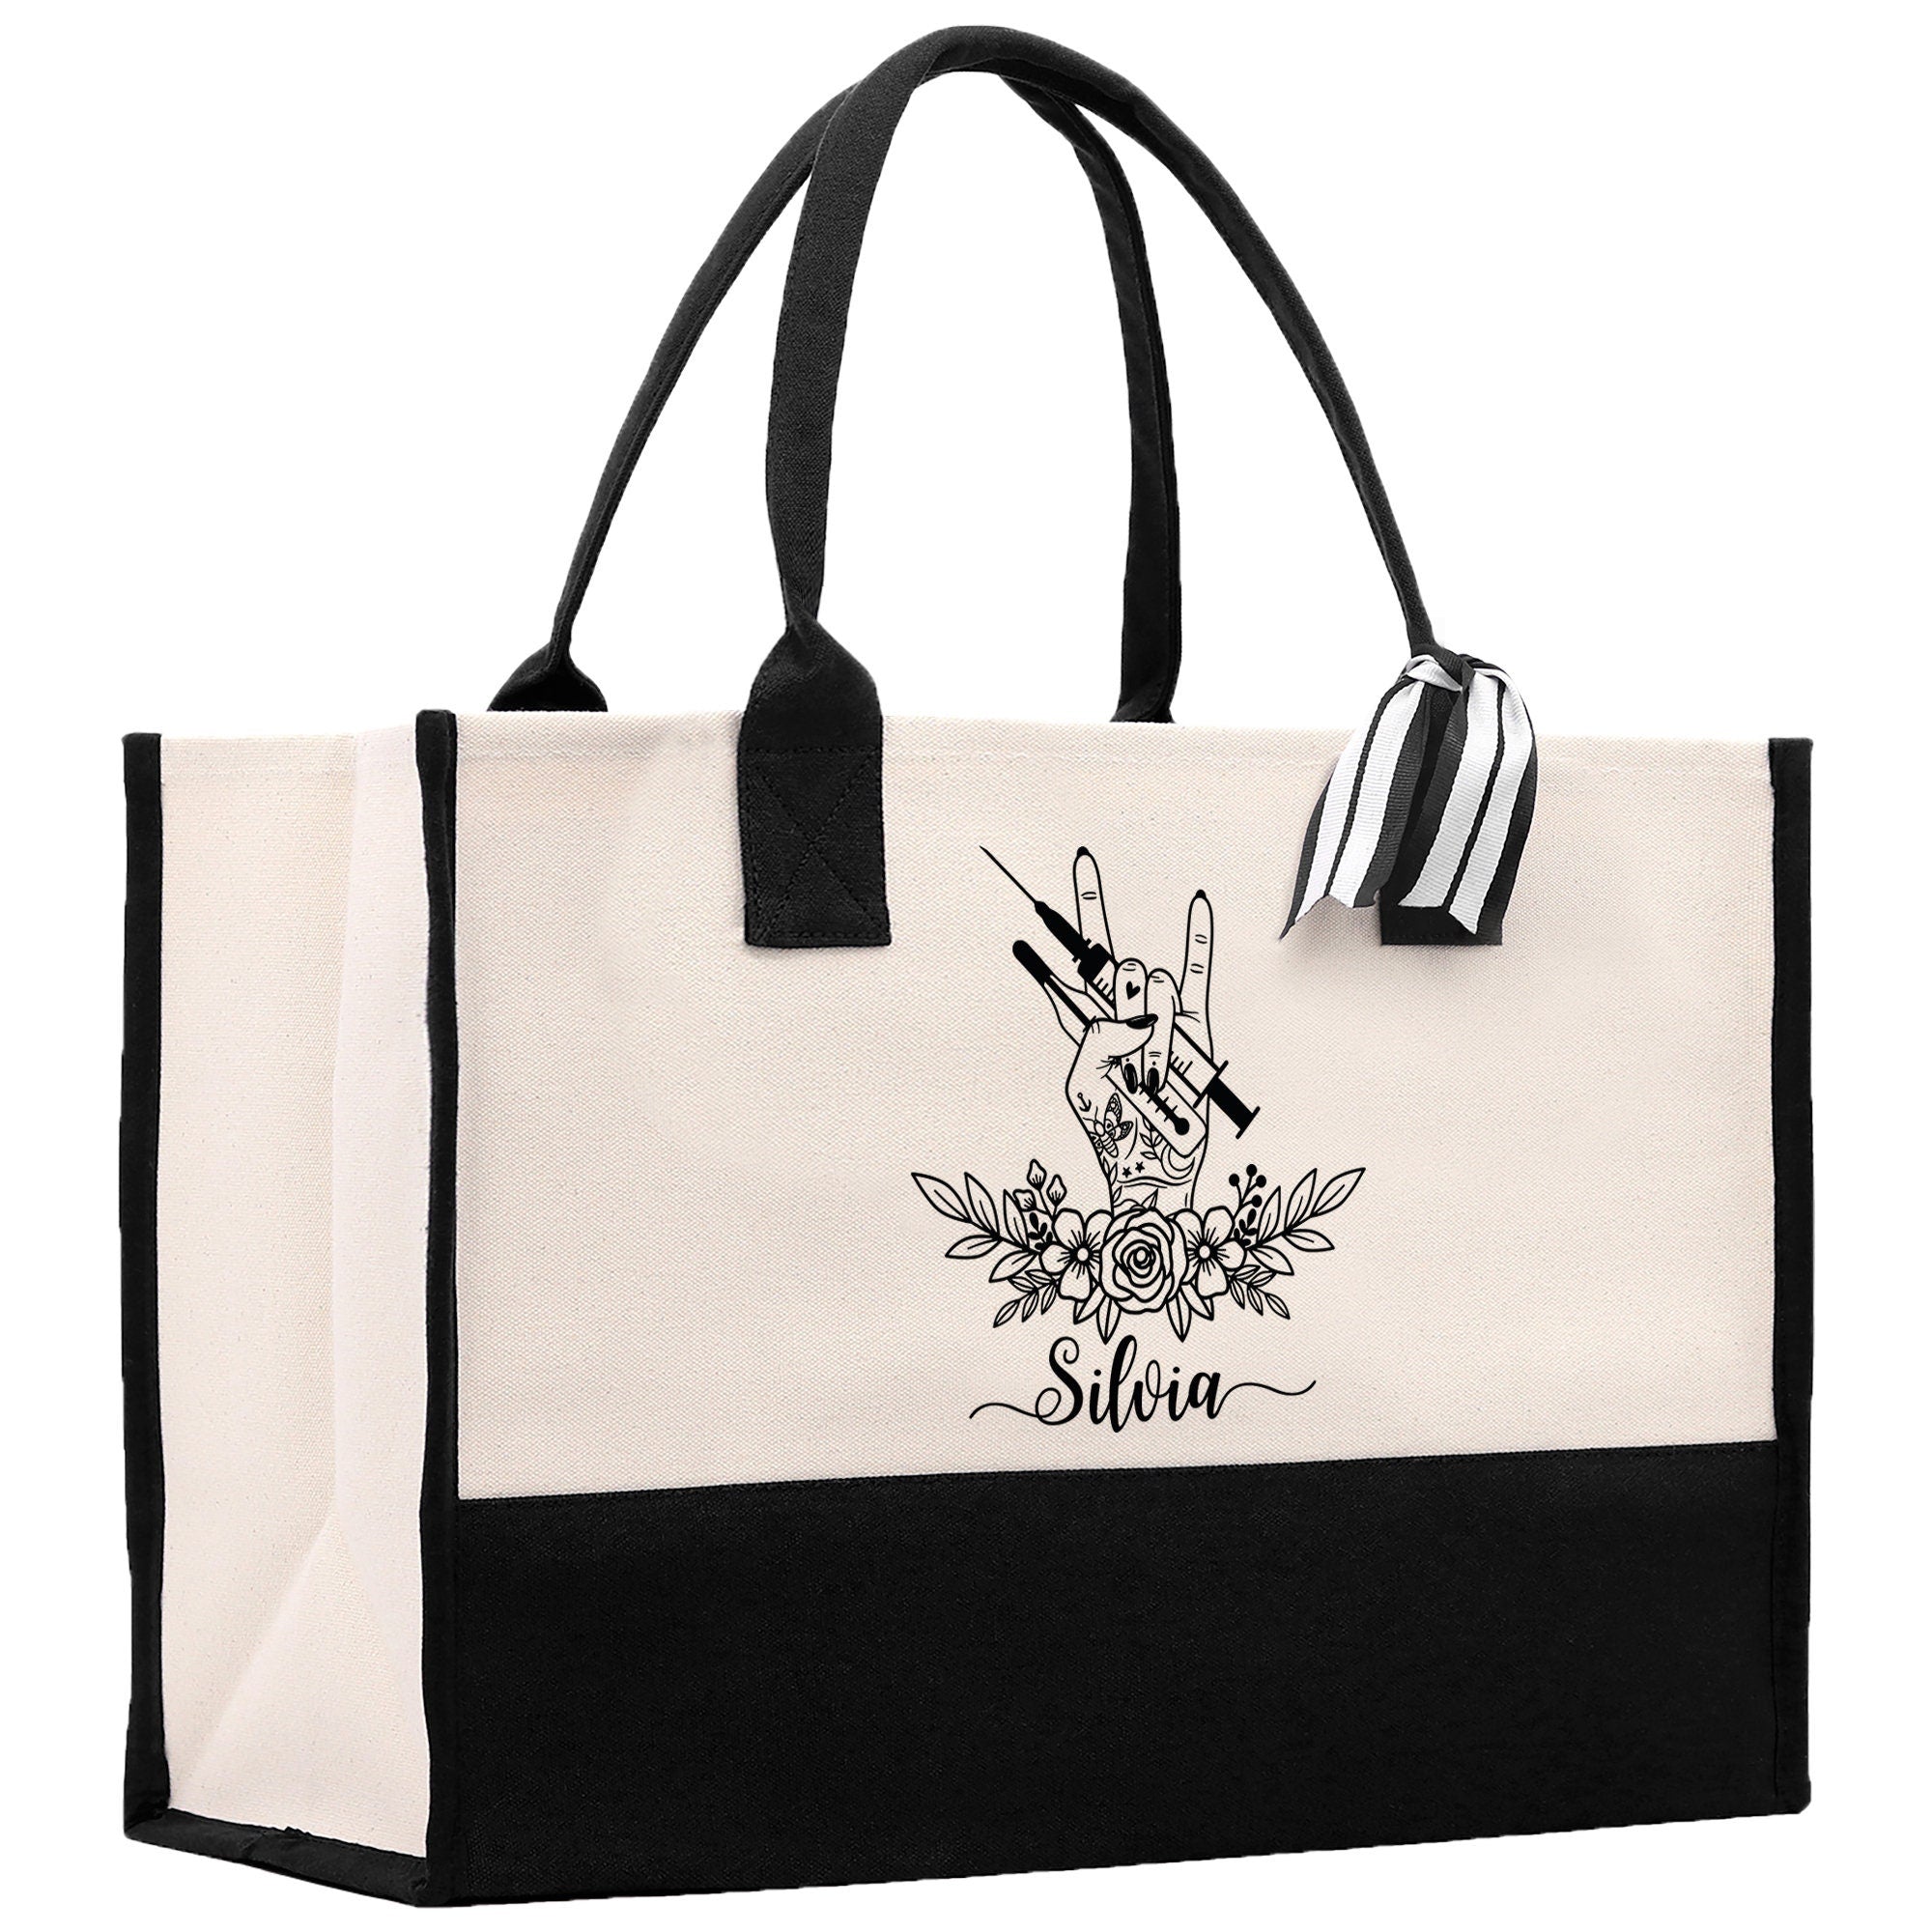 a white and black bag with a black handle